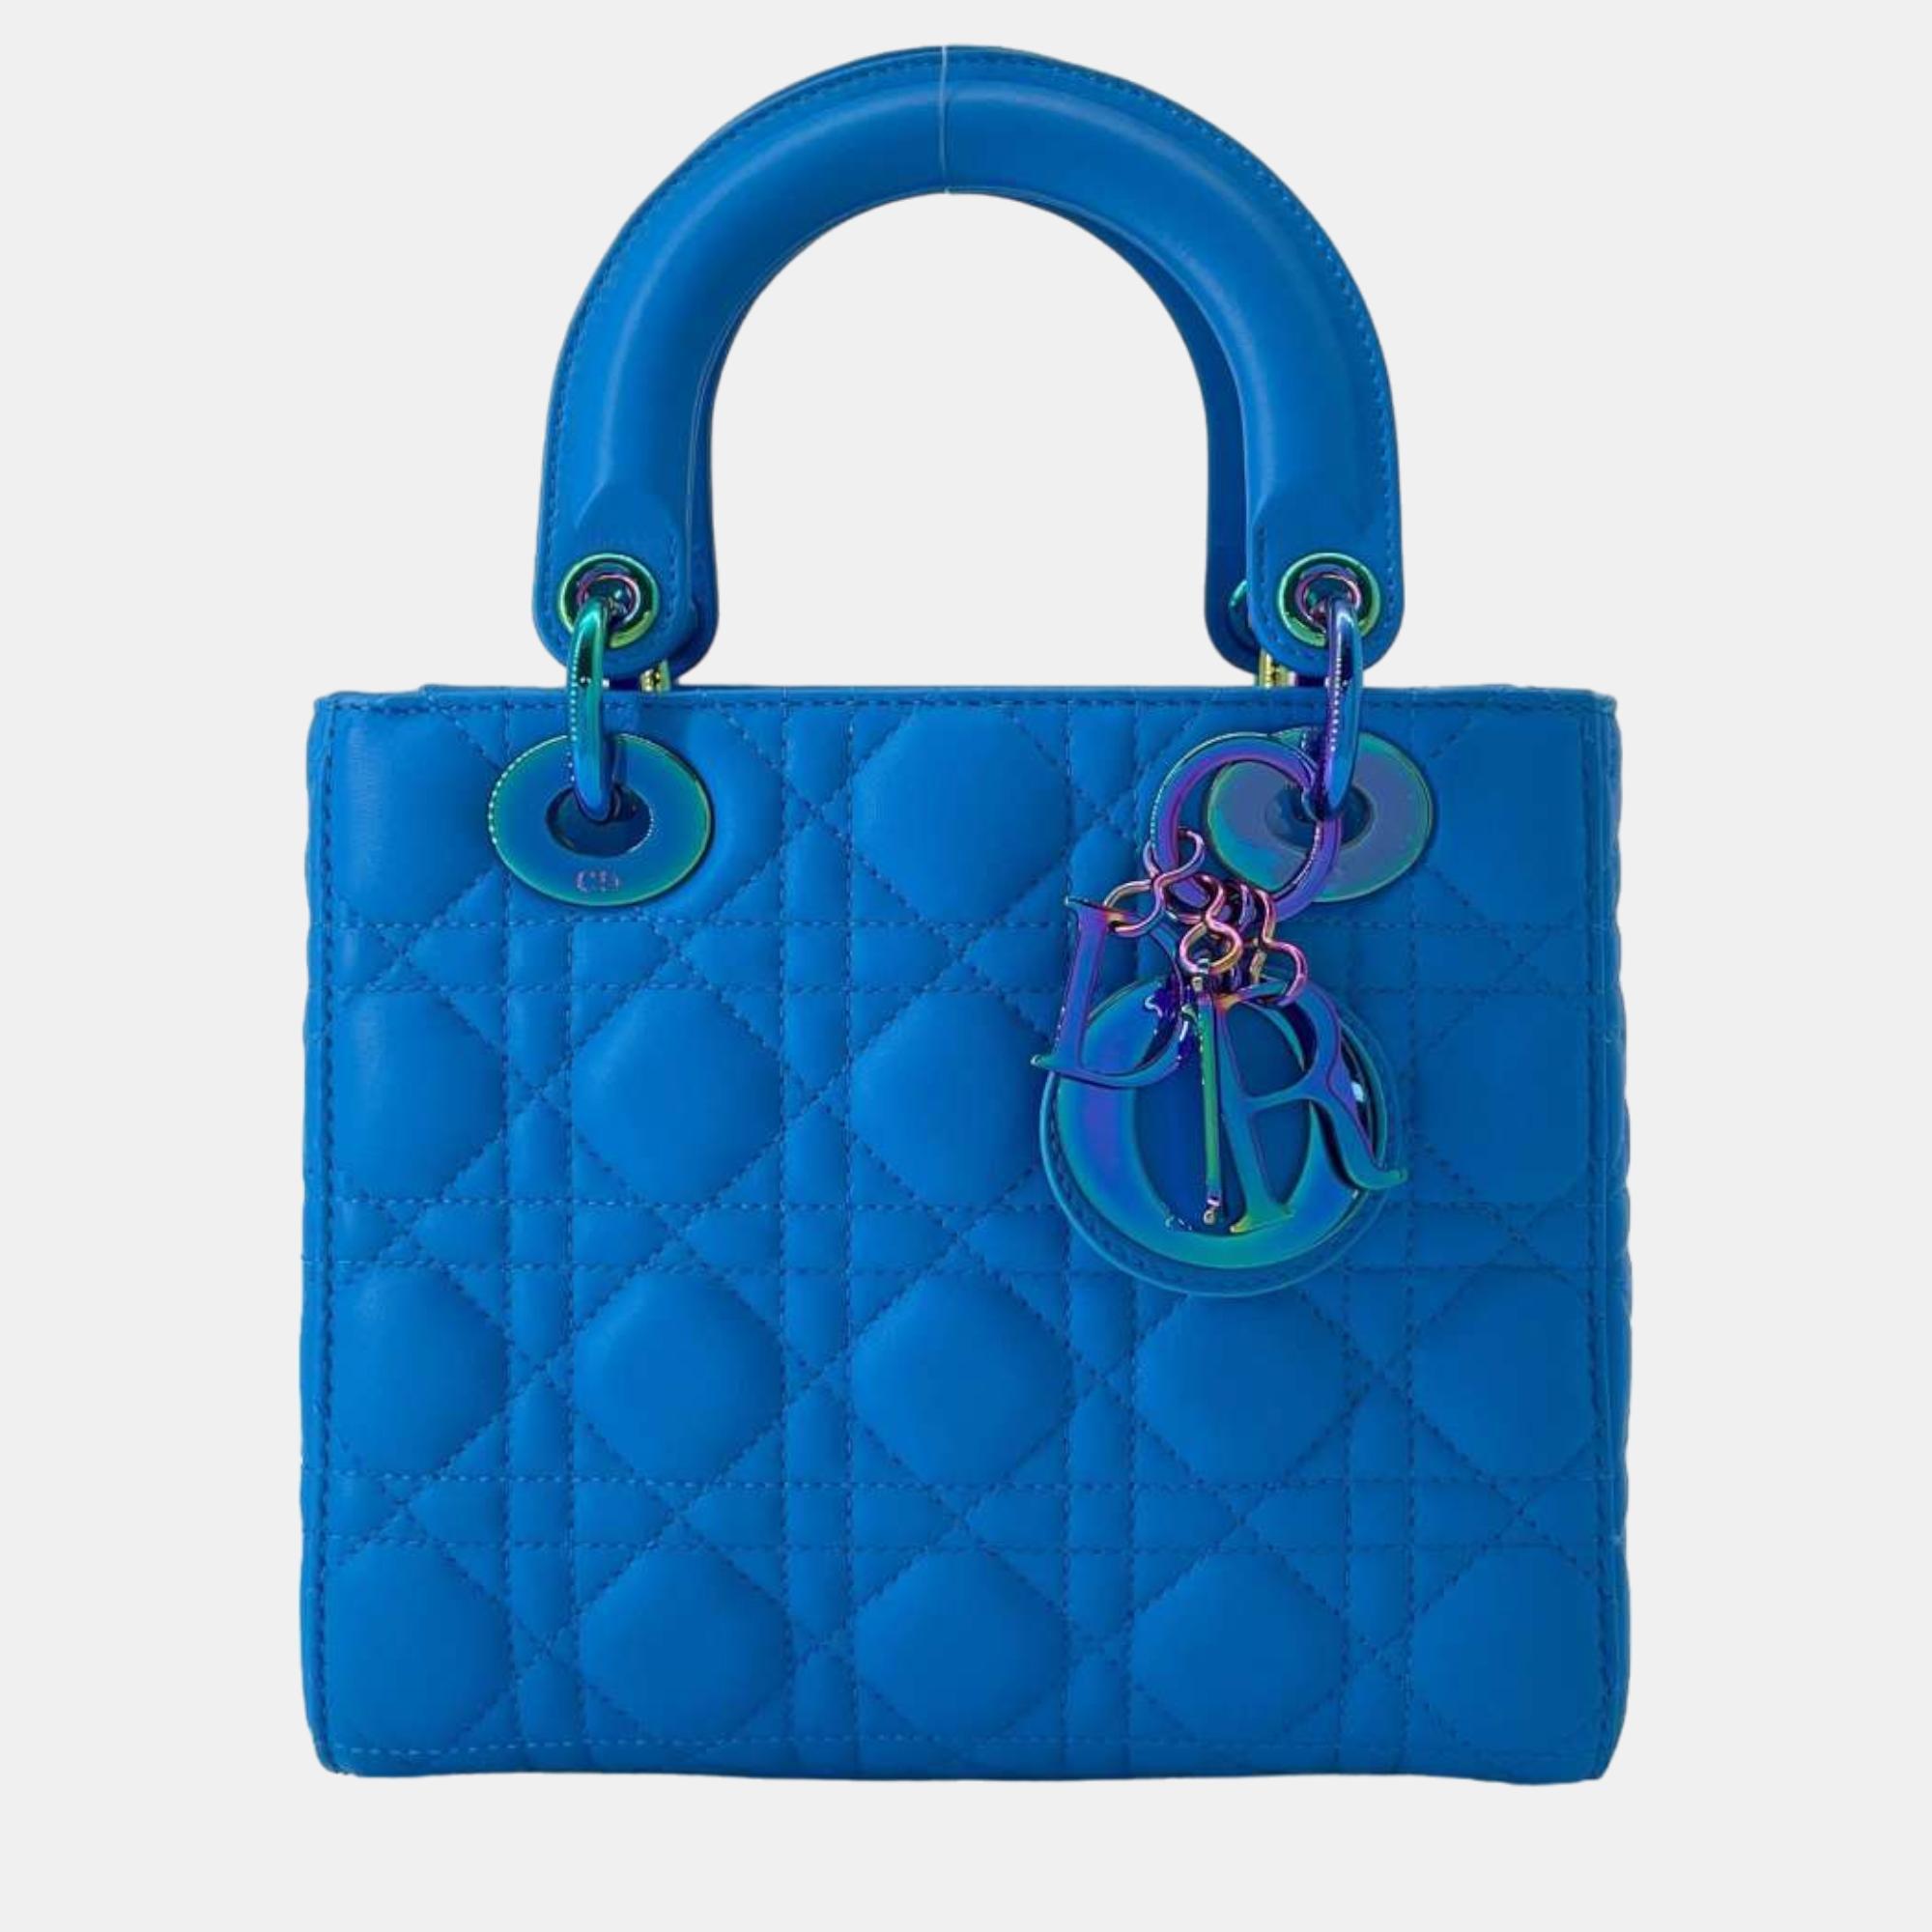 Dior blue leather lady dior small top handle bag